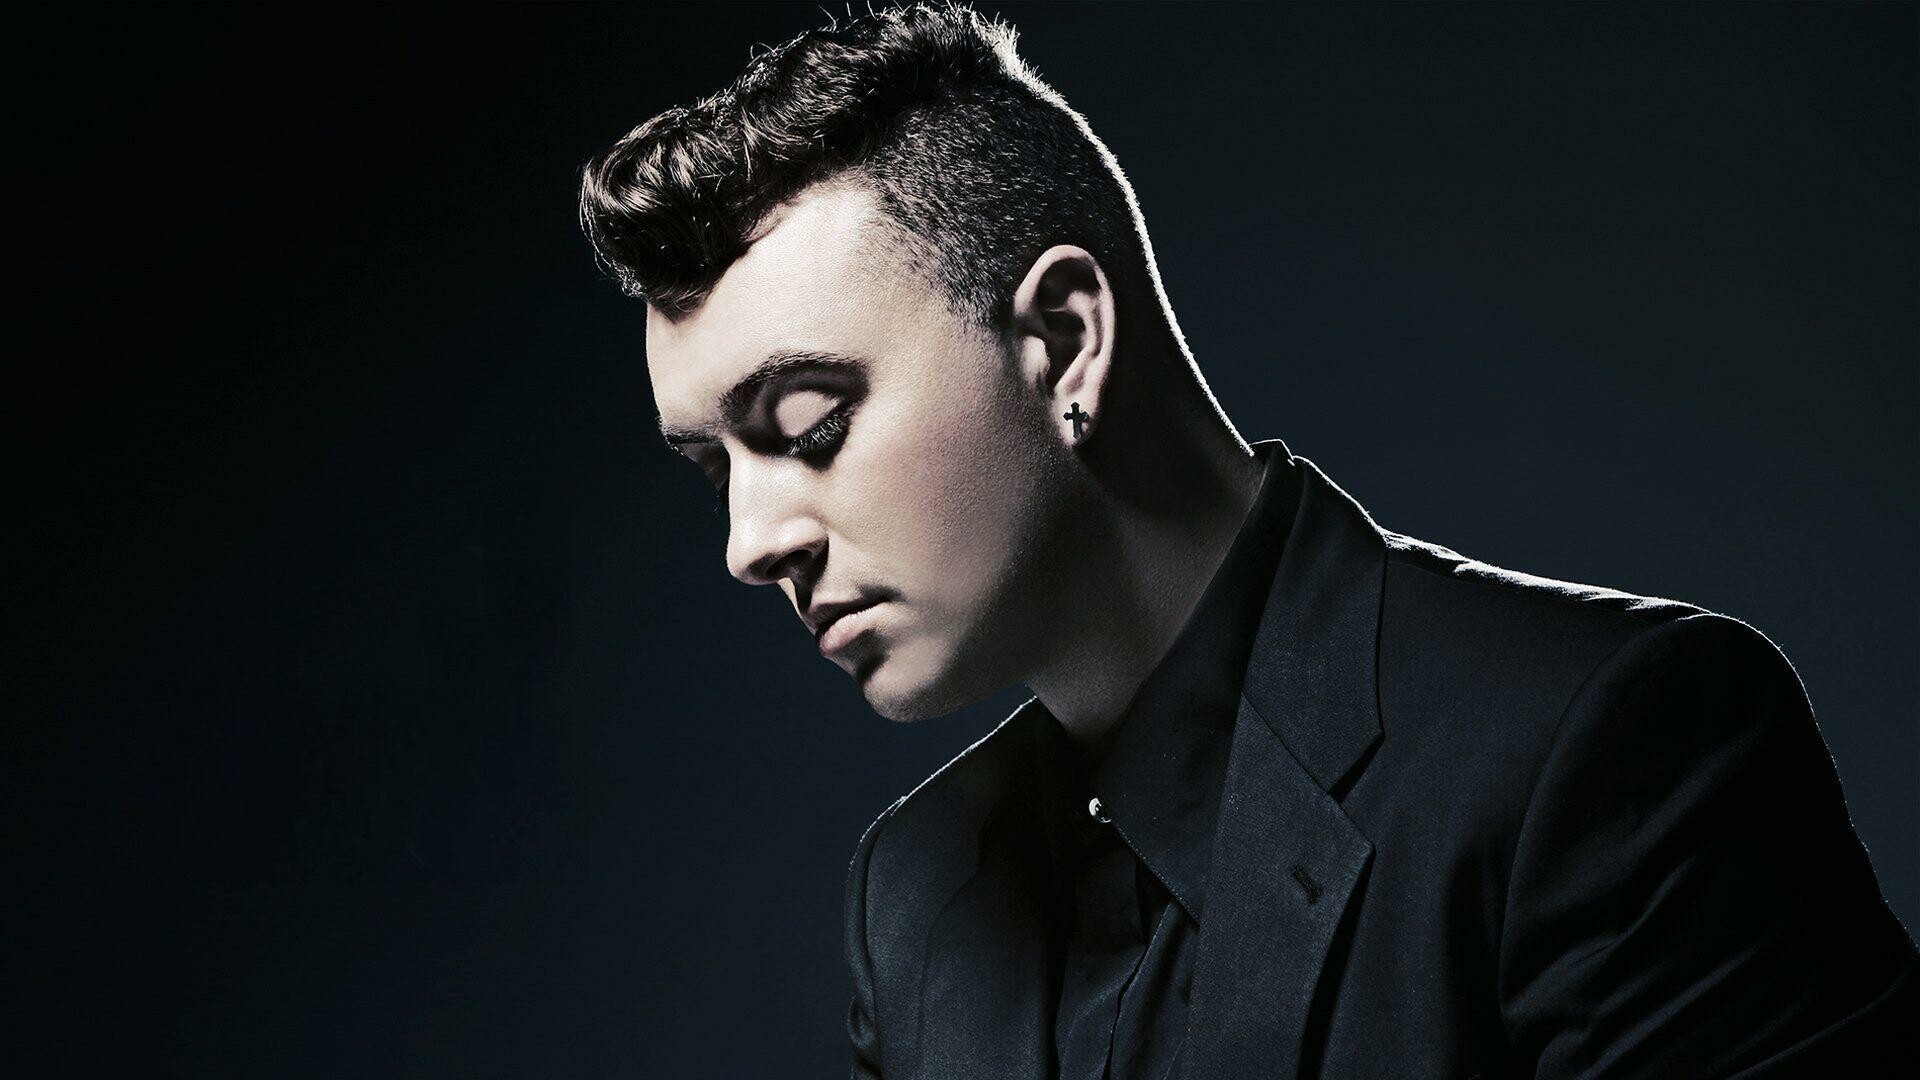 Sam Smith: "Promises" with Calvin Harris peaked at number one in the UK. 1920x1080 Full HD Wallpaper.